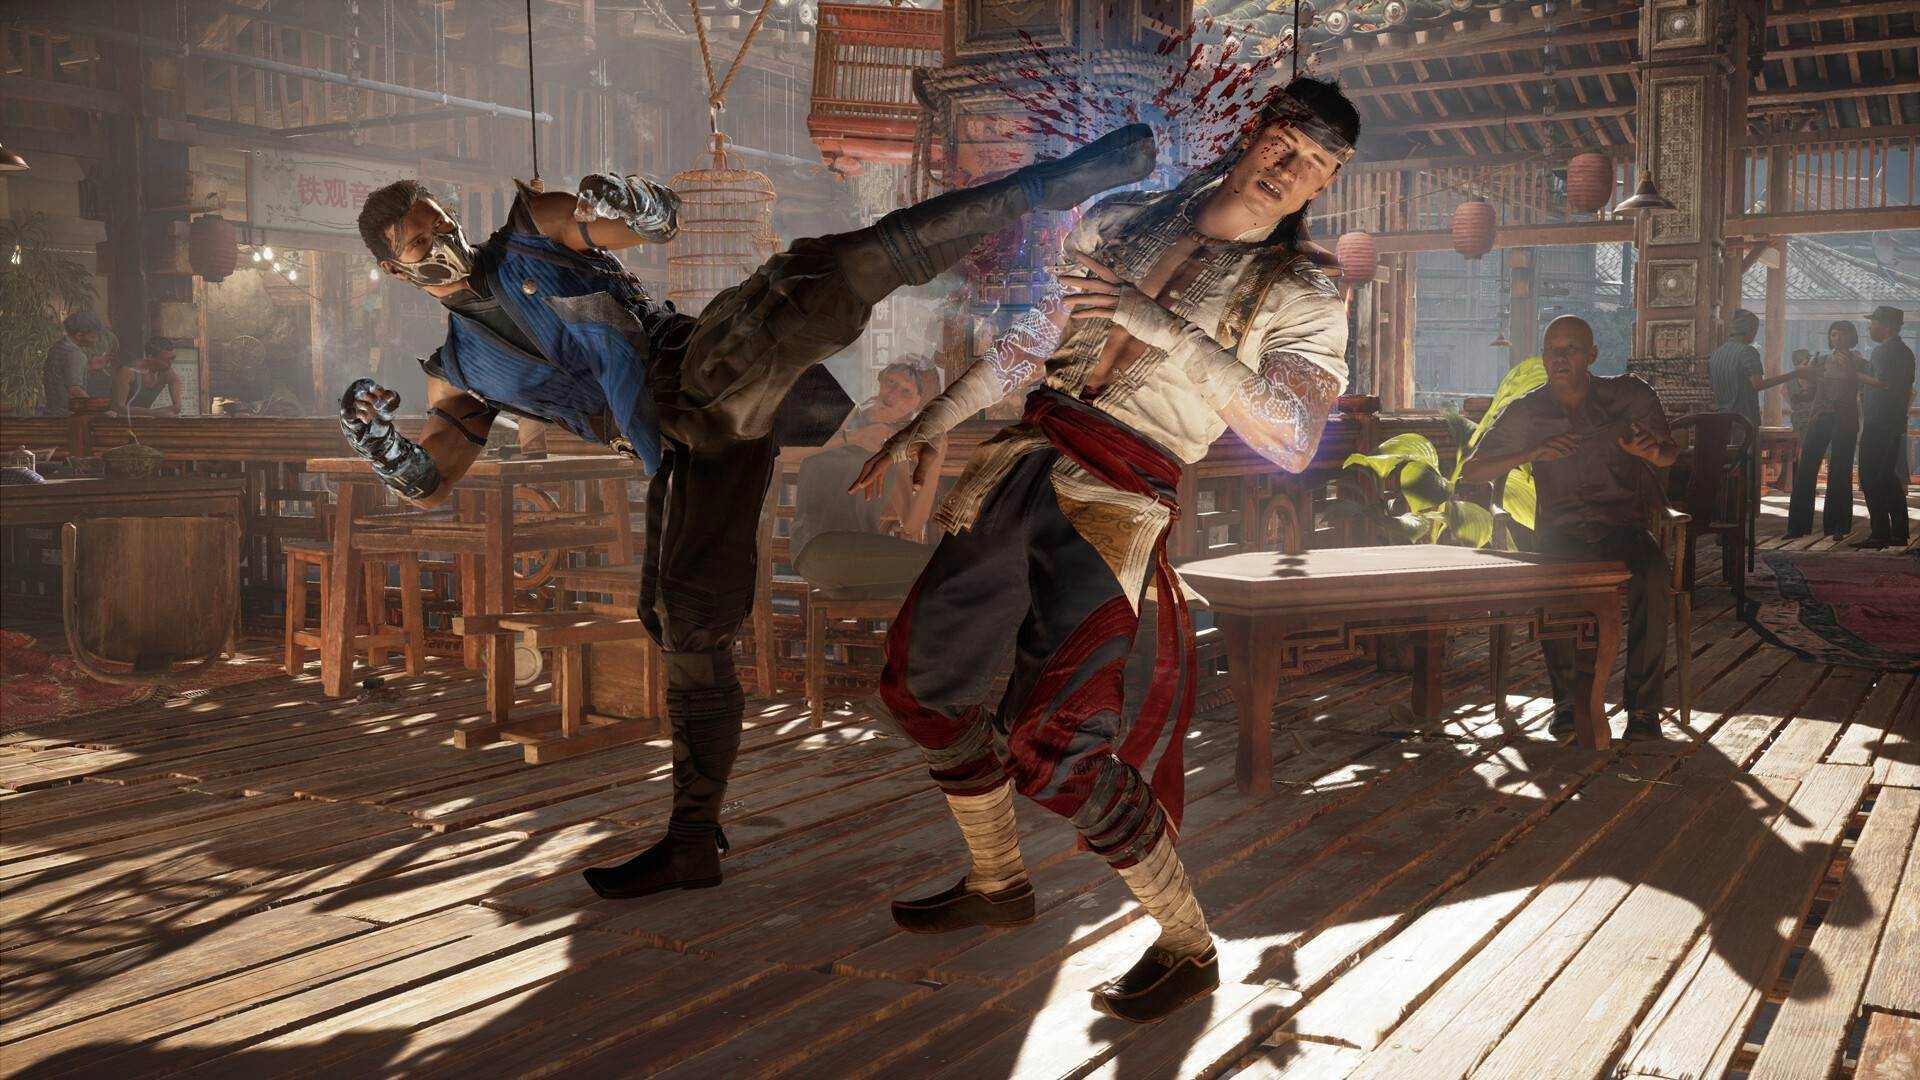 Show your skills! Post your best Mortal Kombat 1 fight to win up to $8